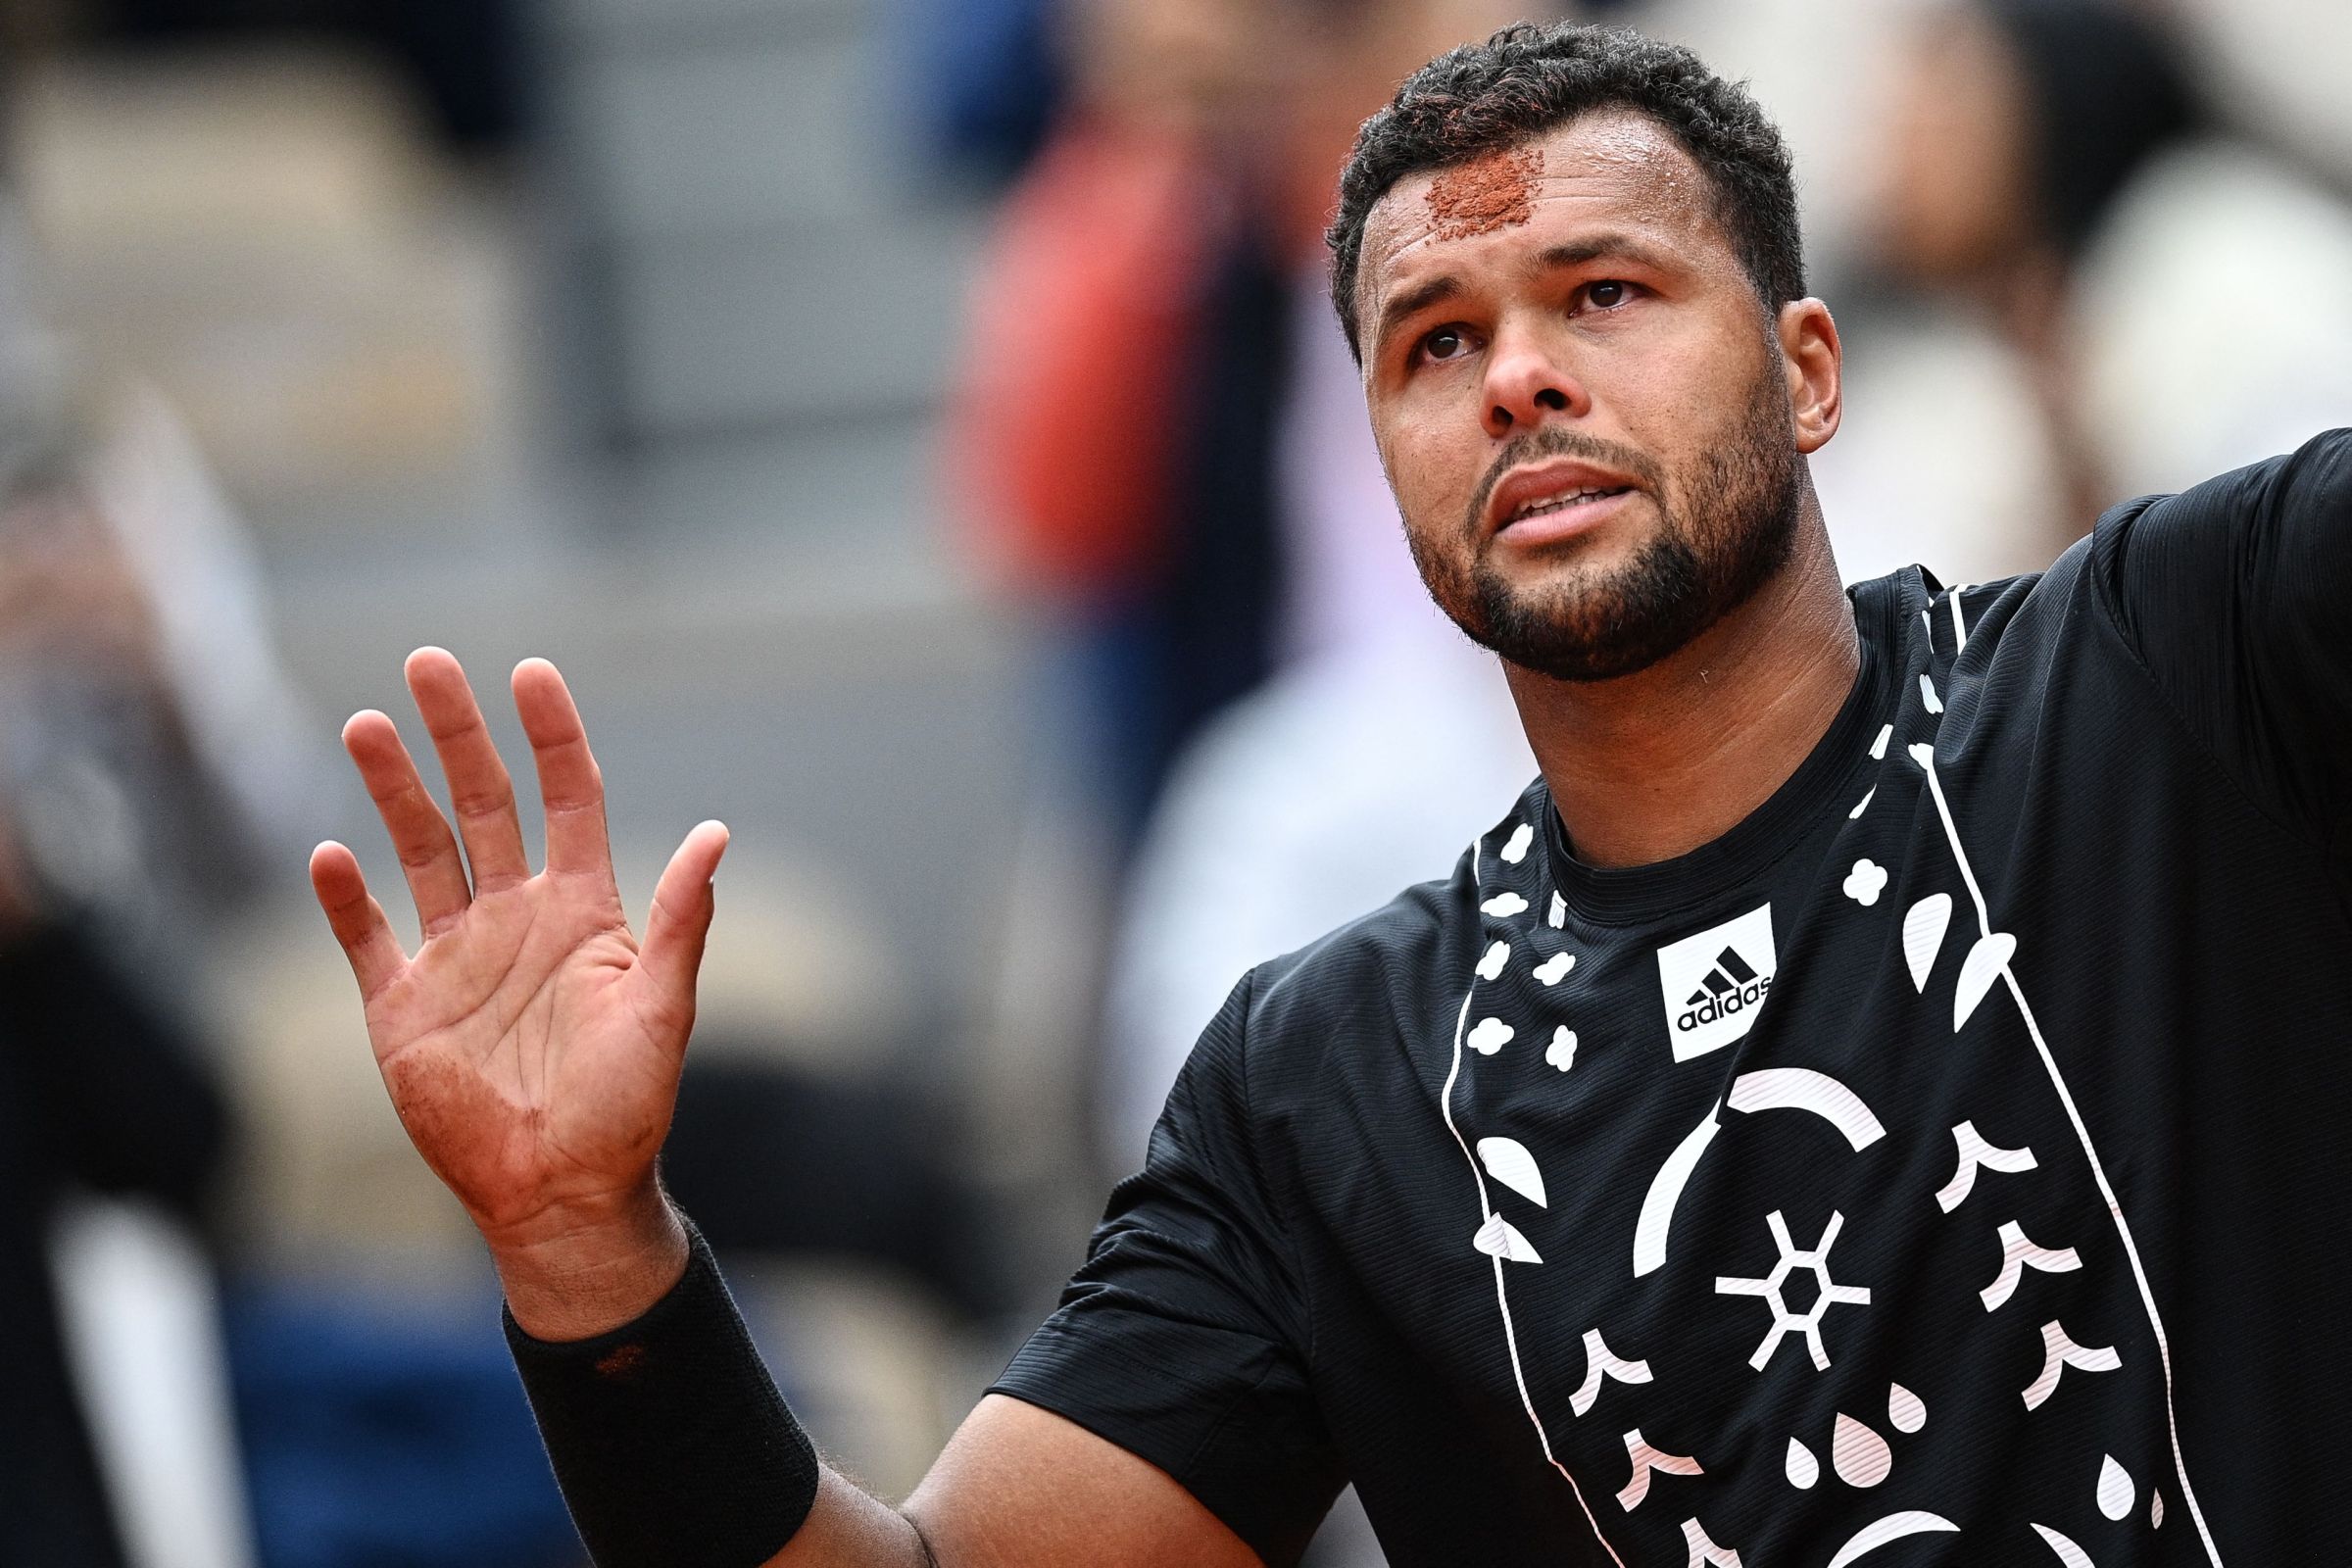 Jo-Wilfried Tsonga salutes the crowd as he retires at the French Open.